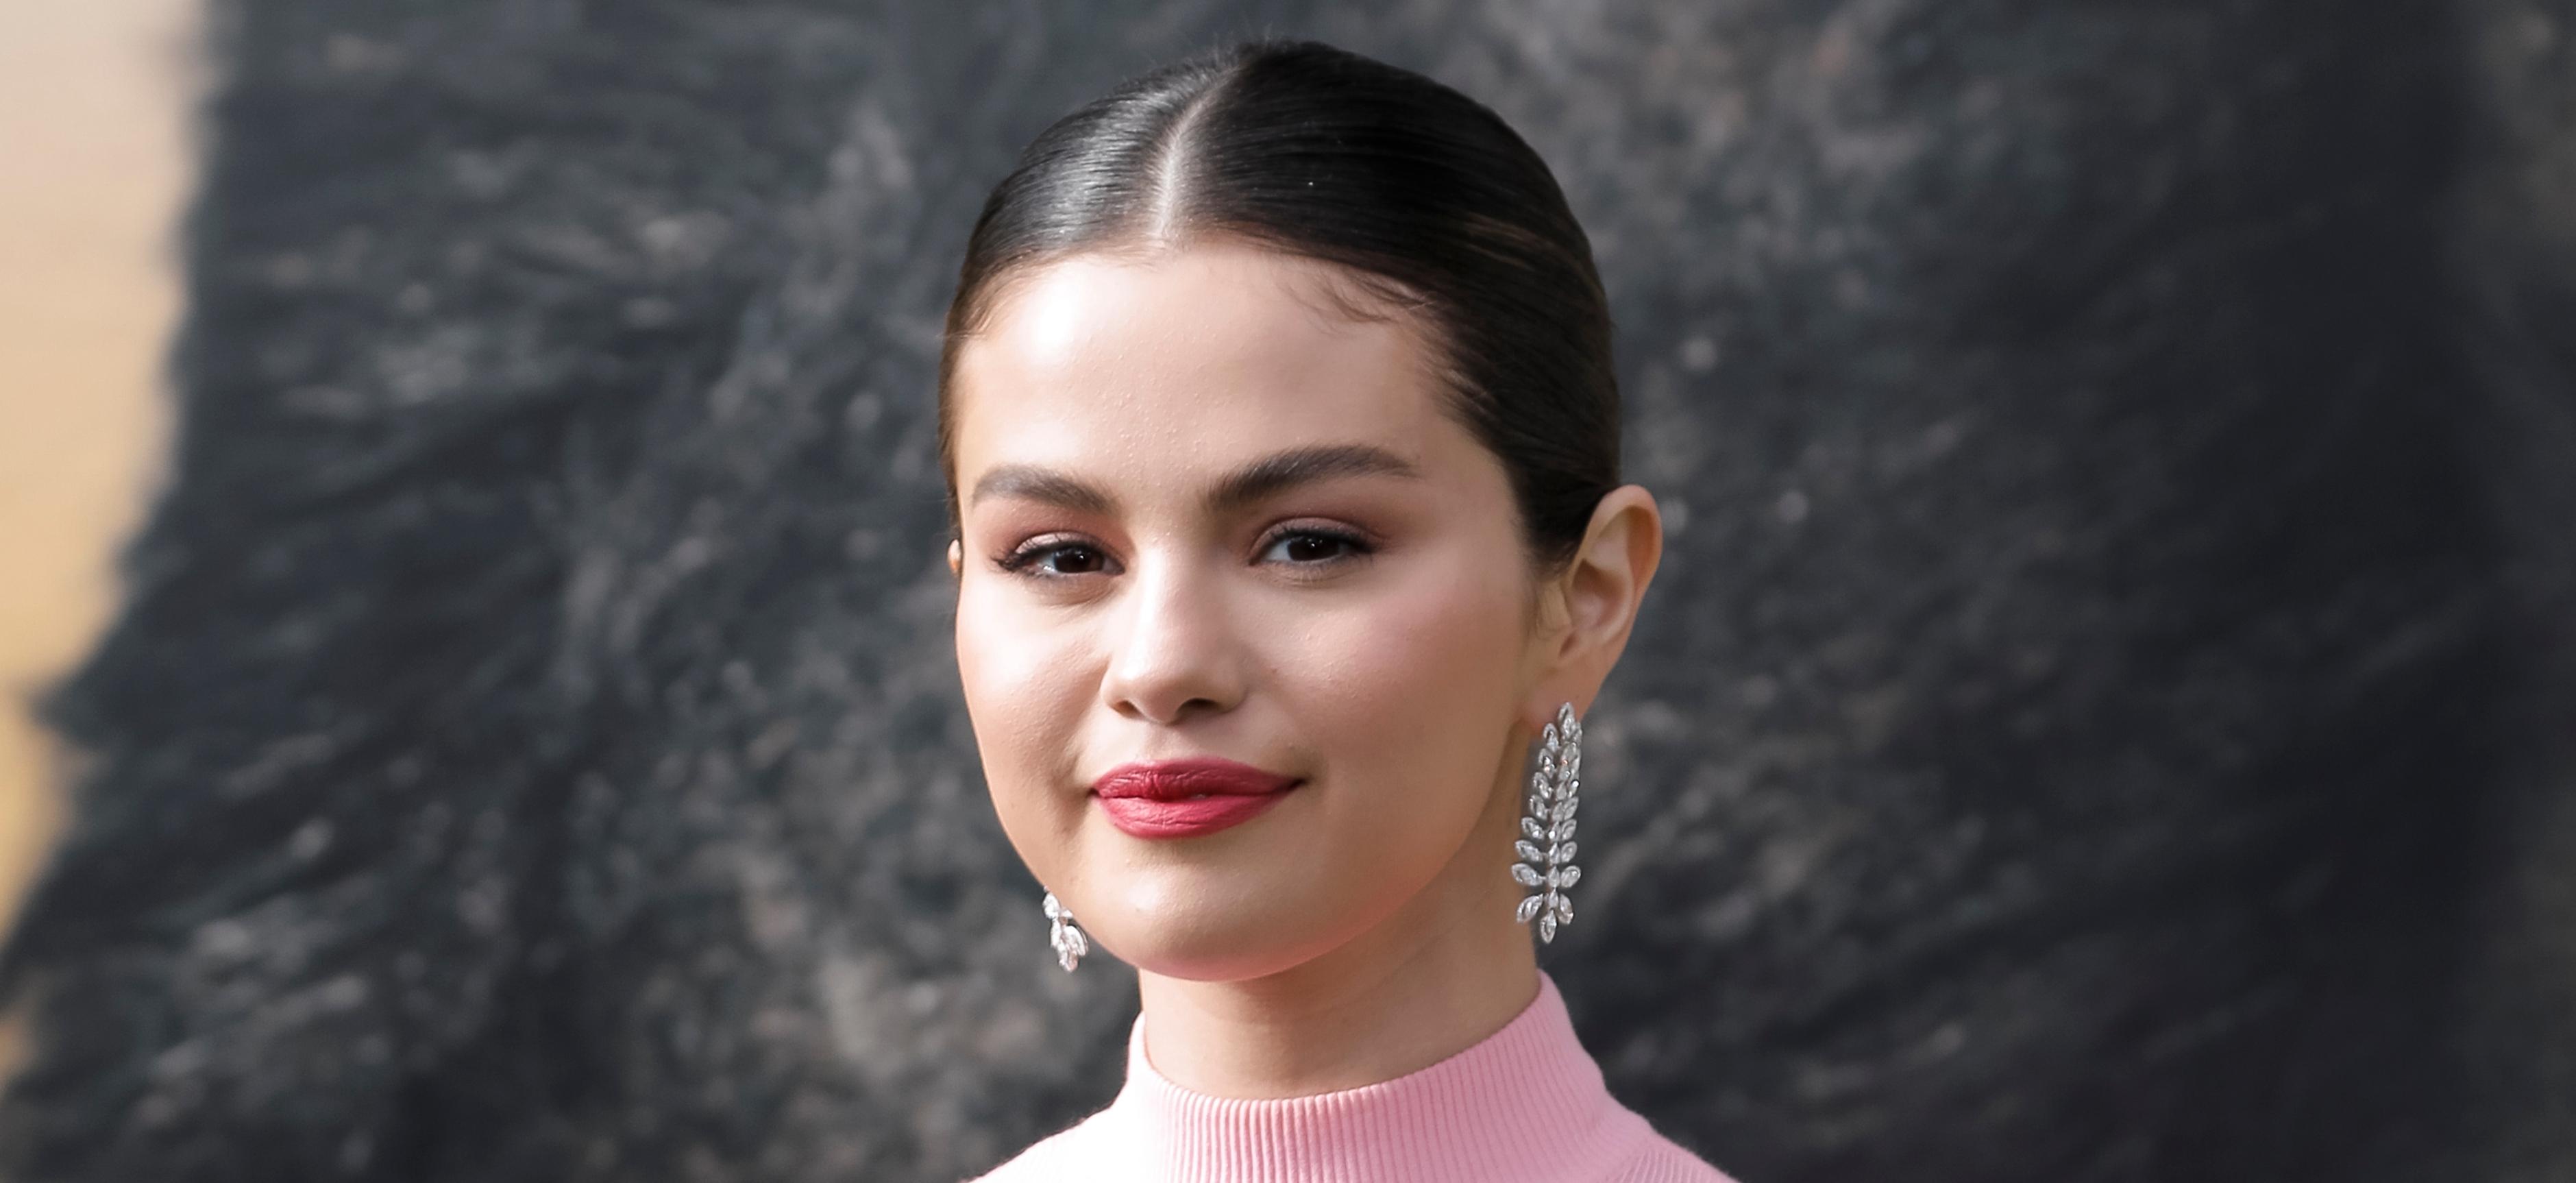 Is Selena Gomez Retiring From Music? Details and Social Account Info